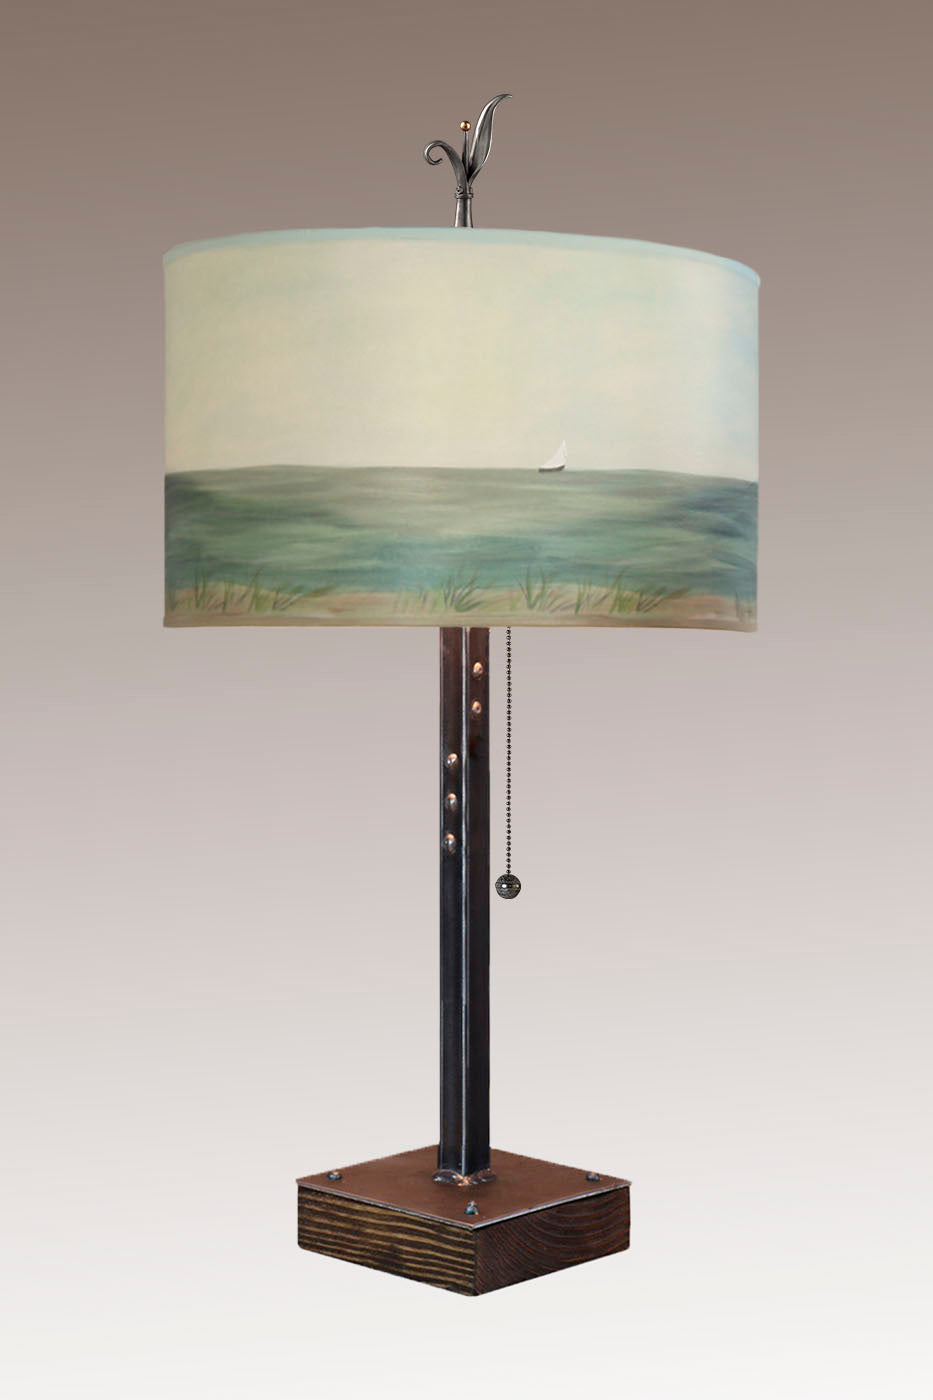 Janna Ugone &amp; Co Table Lamps Steel Table Lamp on Wood with Large Drum Shade in Shore